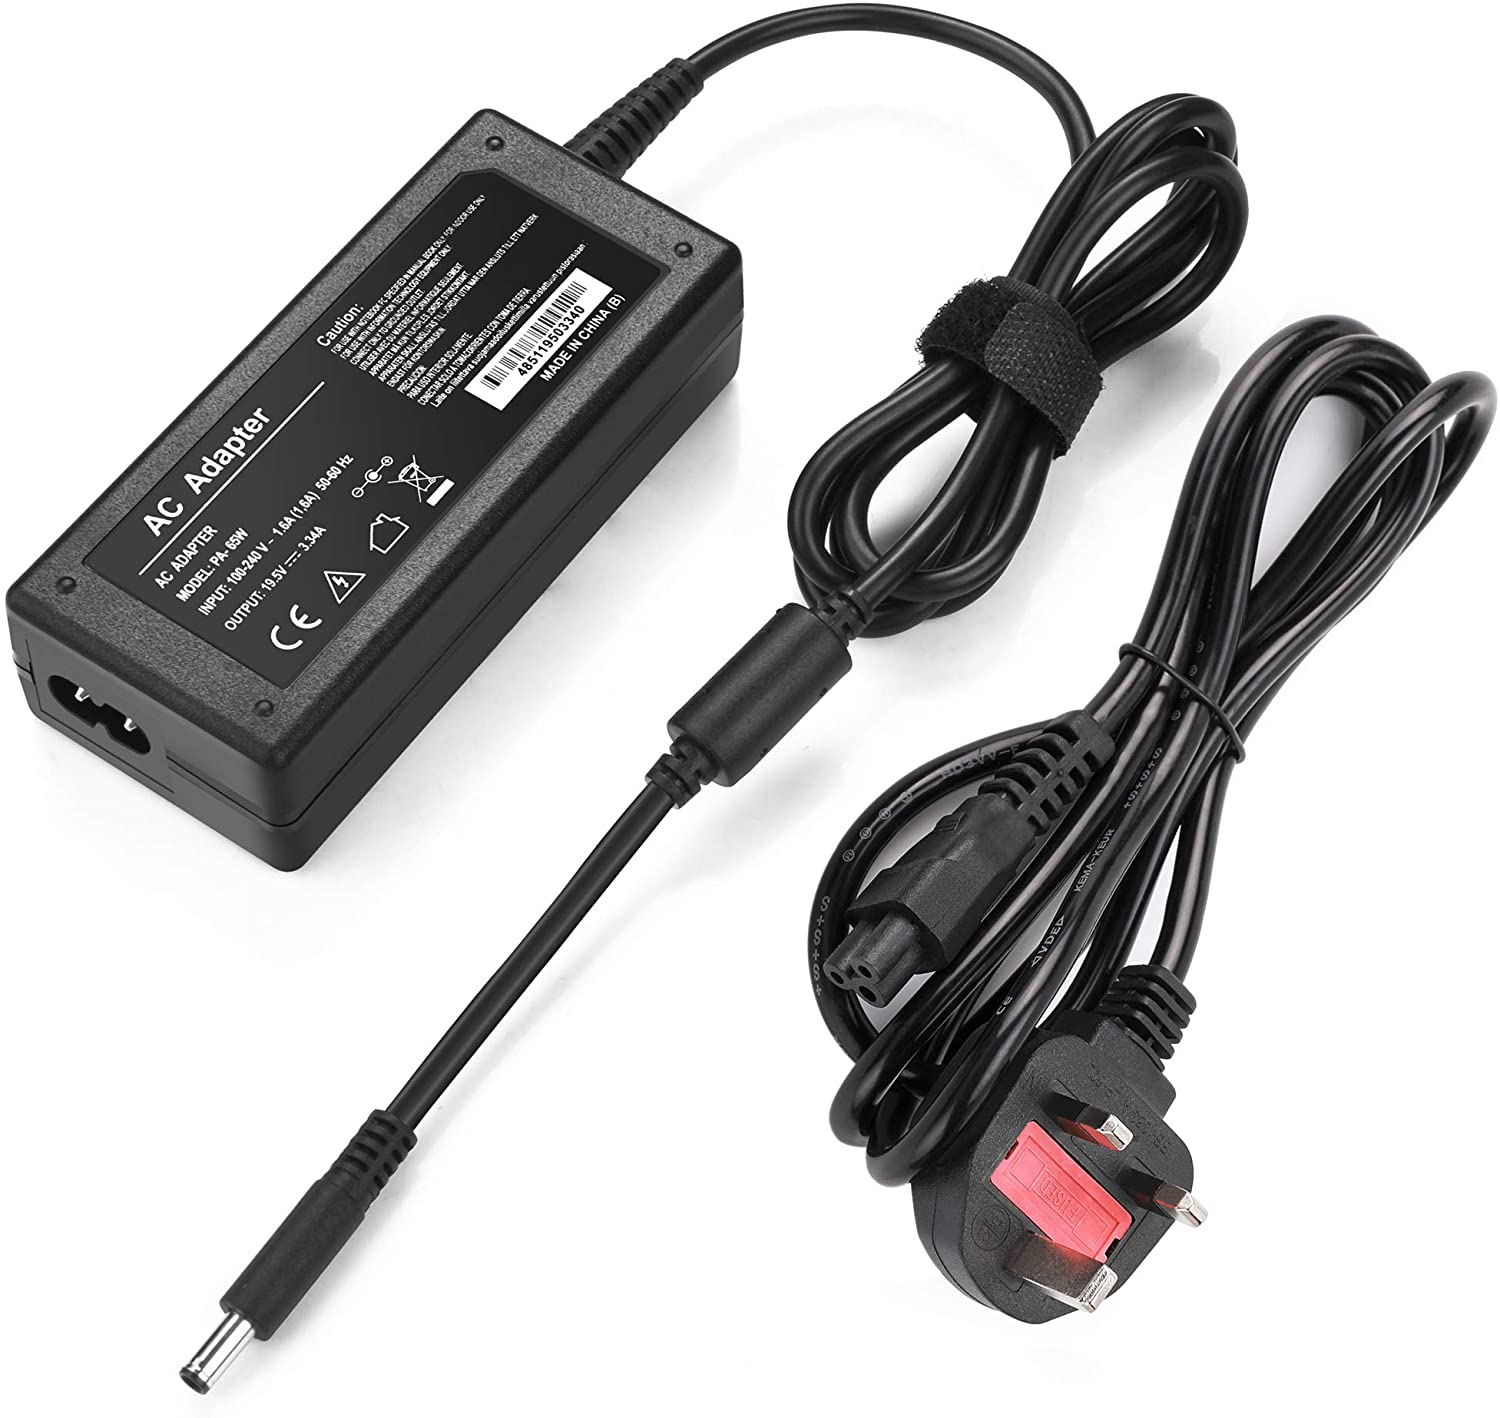 Dell 0G6J41 Laptop Charger